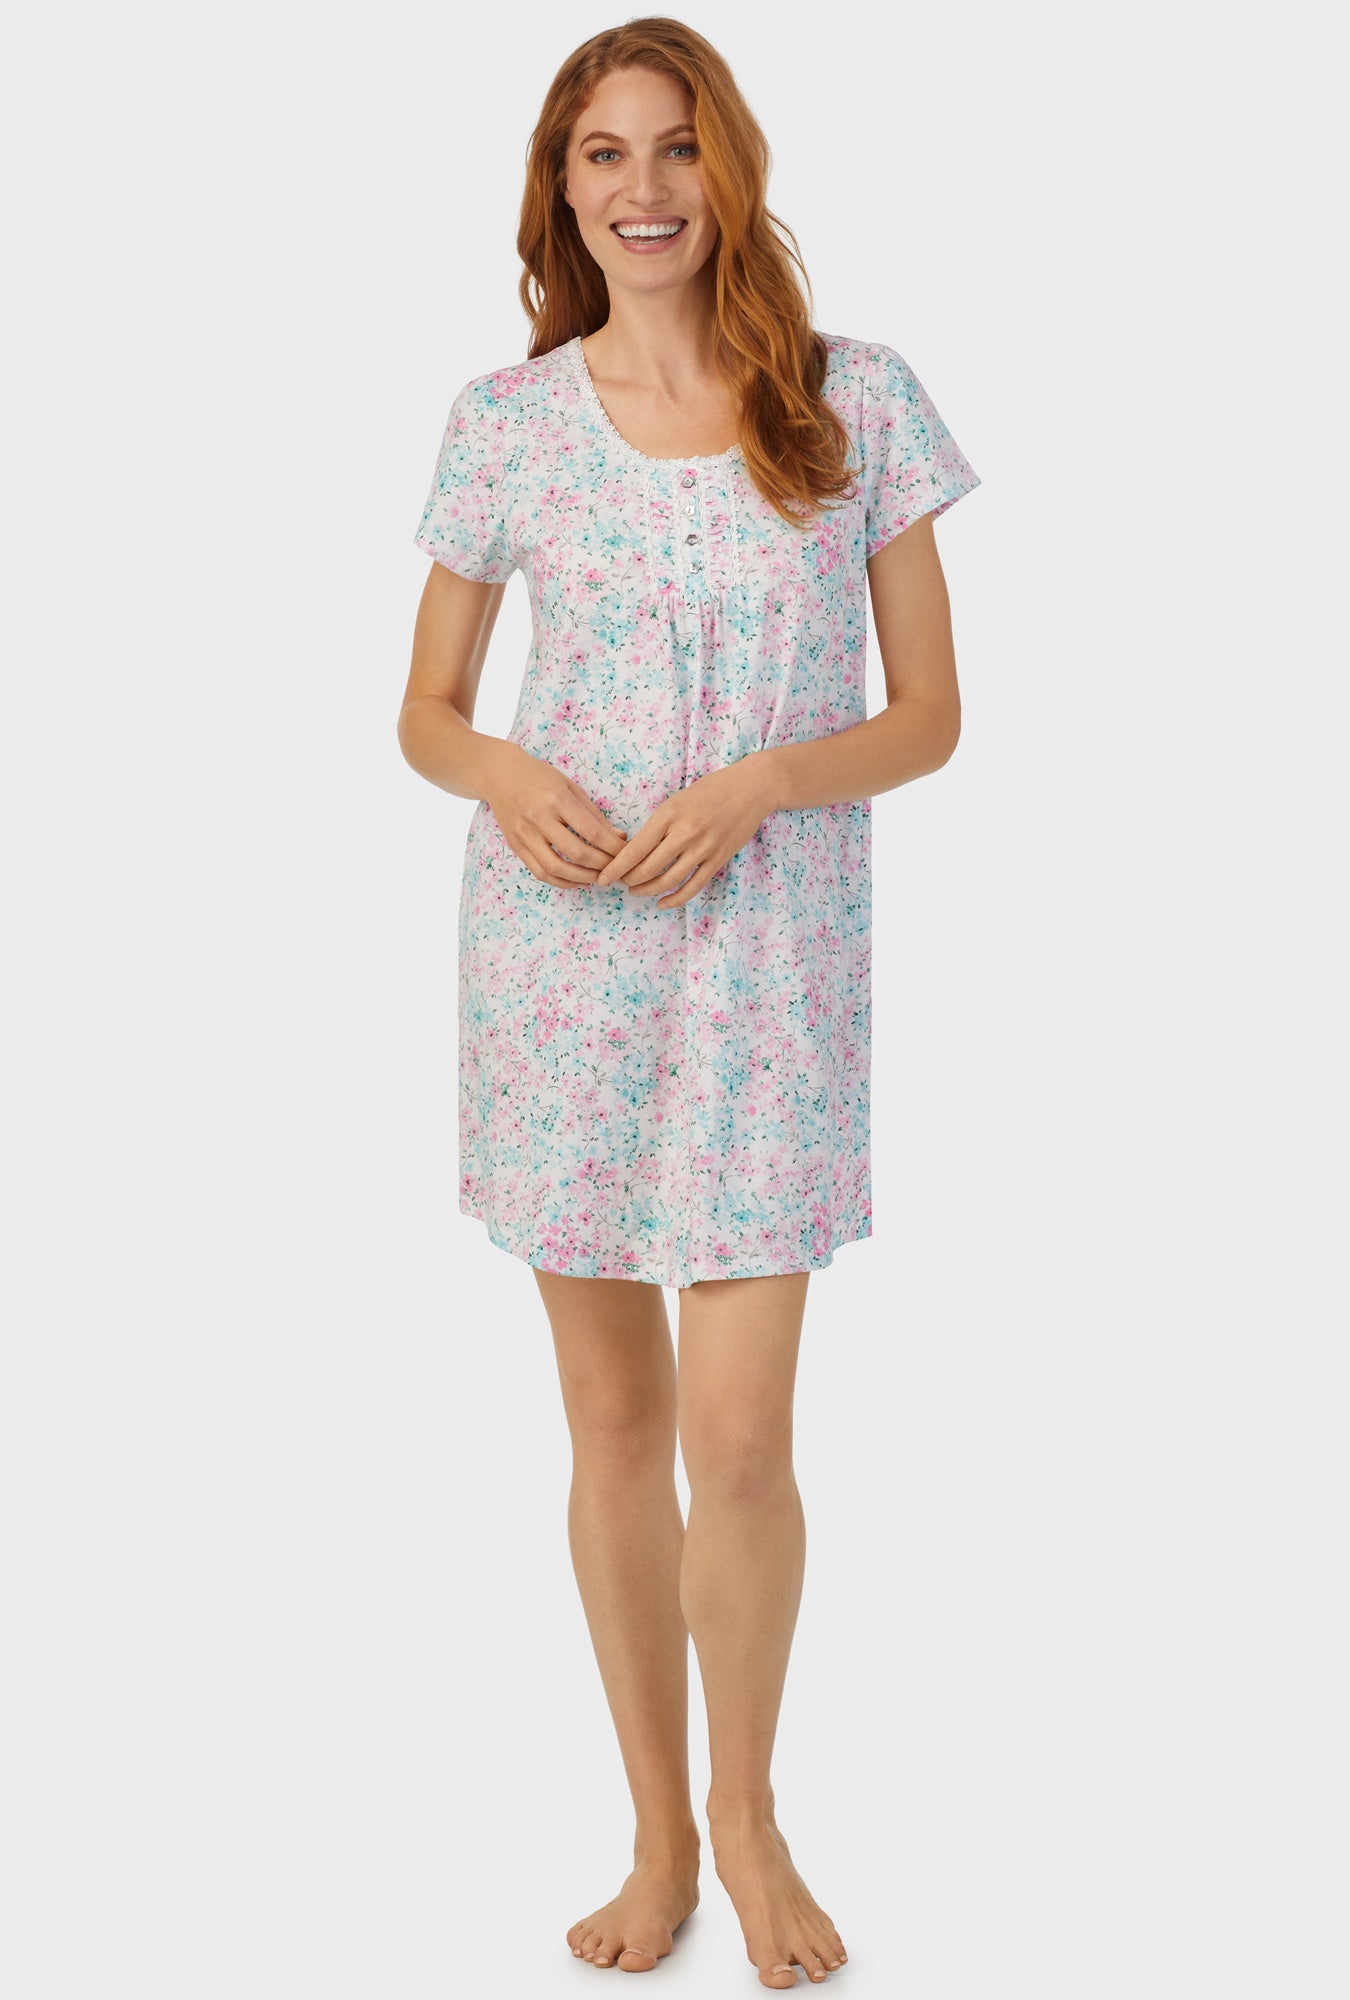 A lady wearing white cap sleeve nightshirt with aqua and pink floral print.